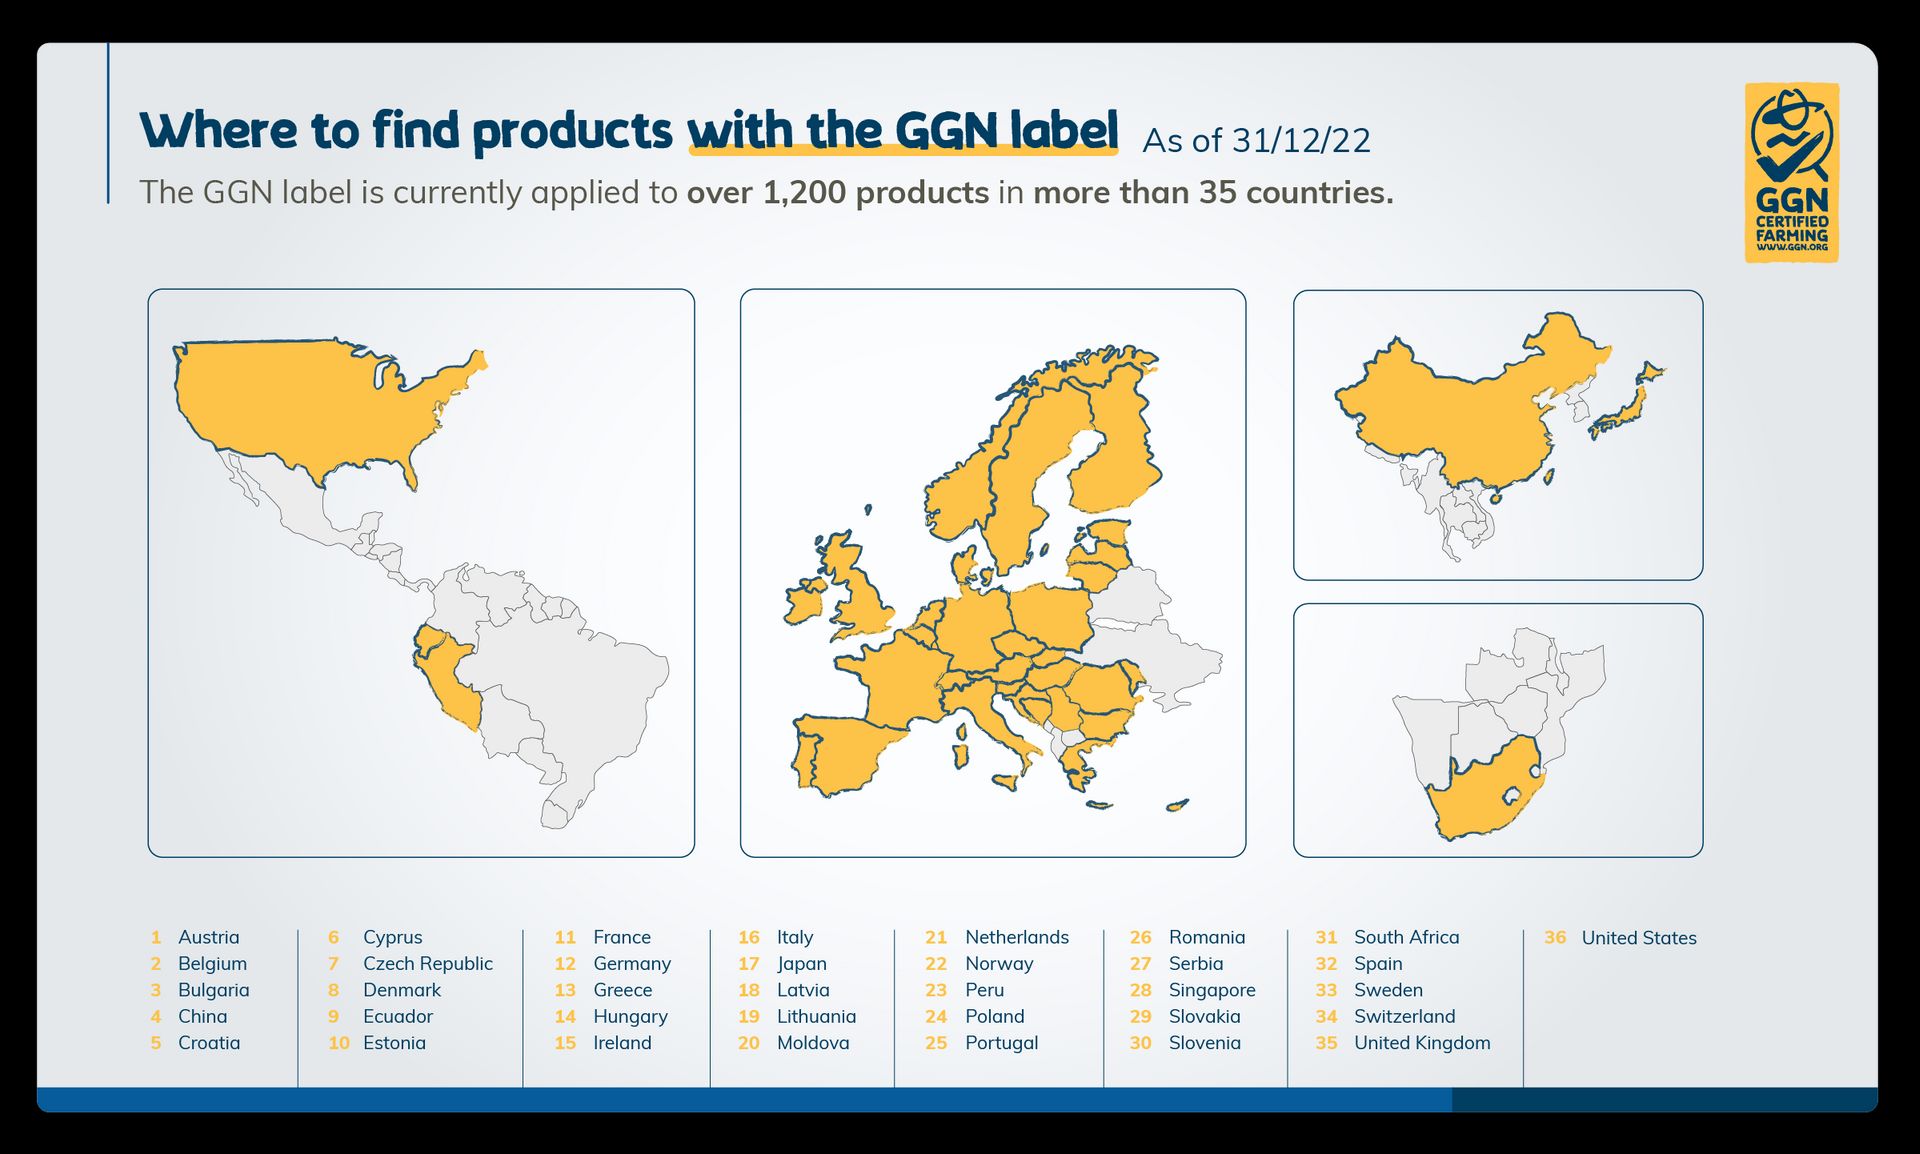 Map of countries where consumers can find products with the GGN label